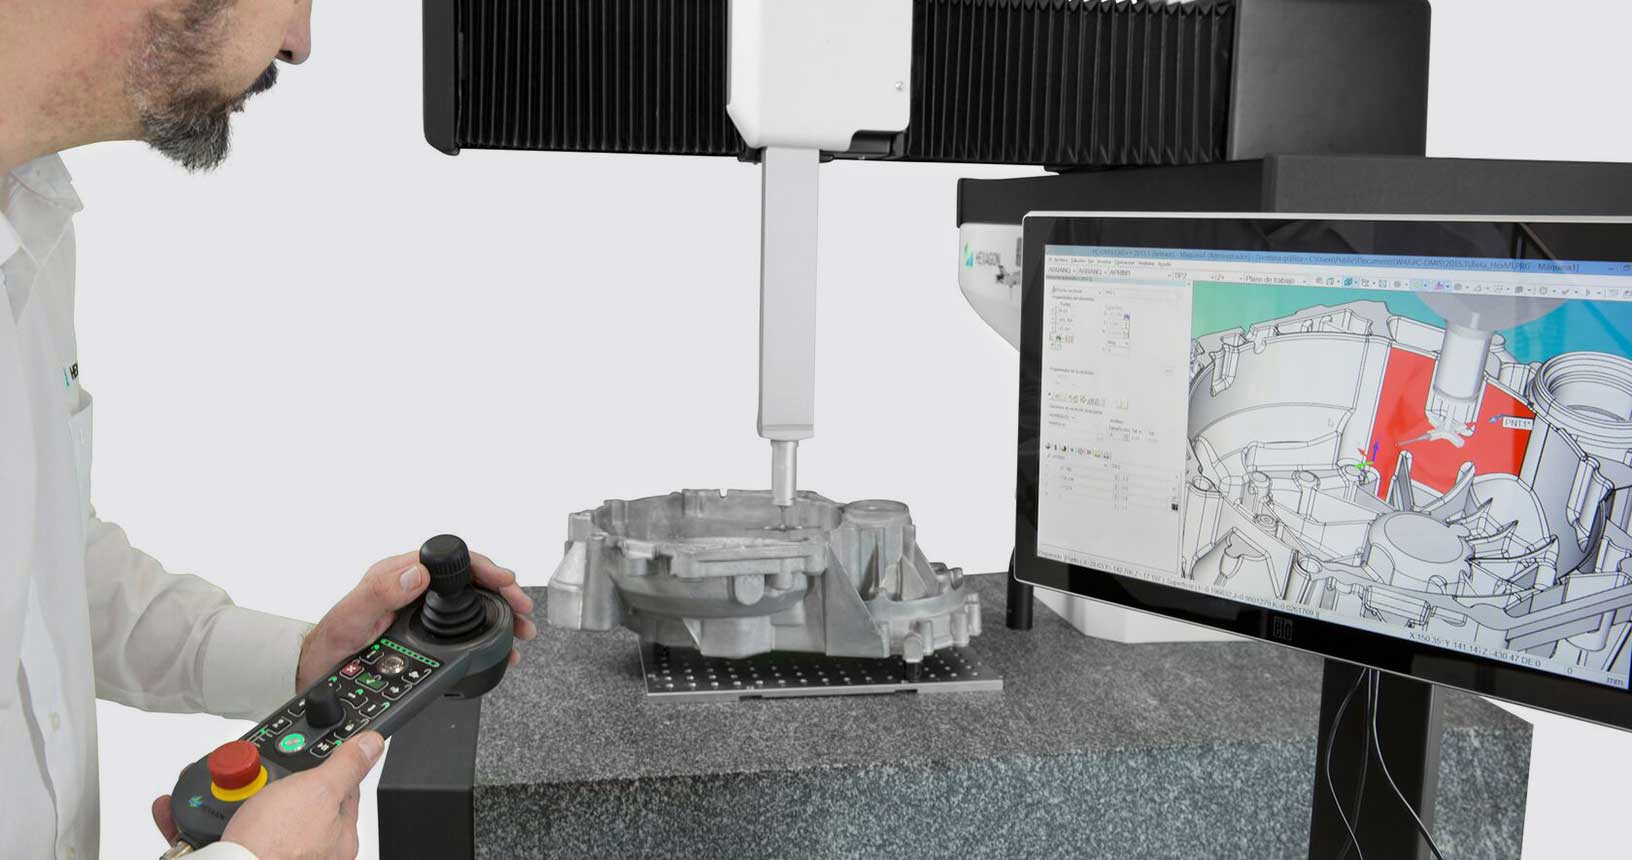 Shop-floor operator using jogbox to measure a part on a coordinate measuring machine with software in foreground. 